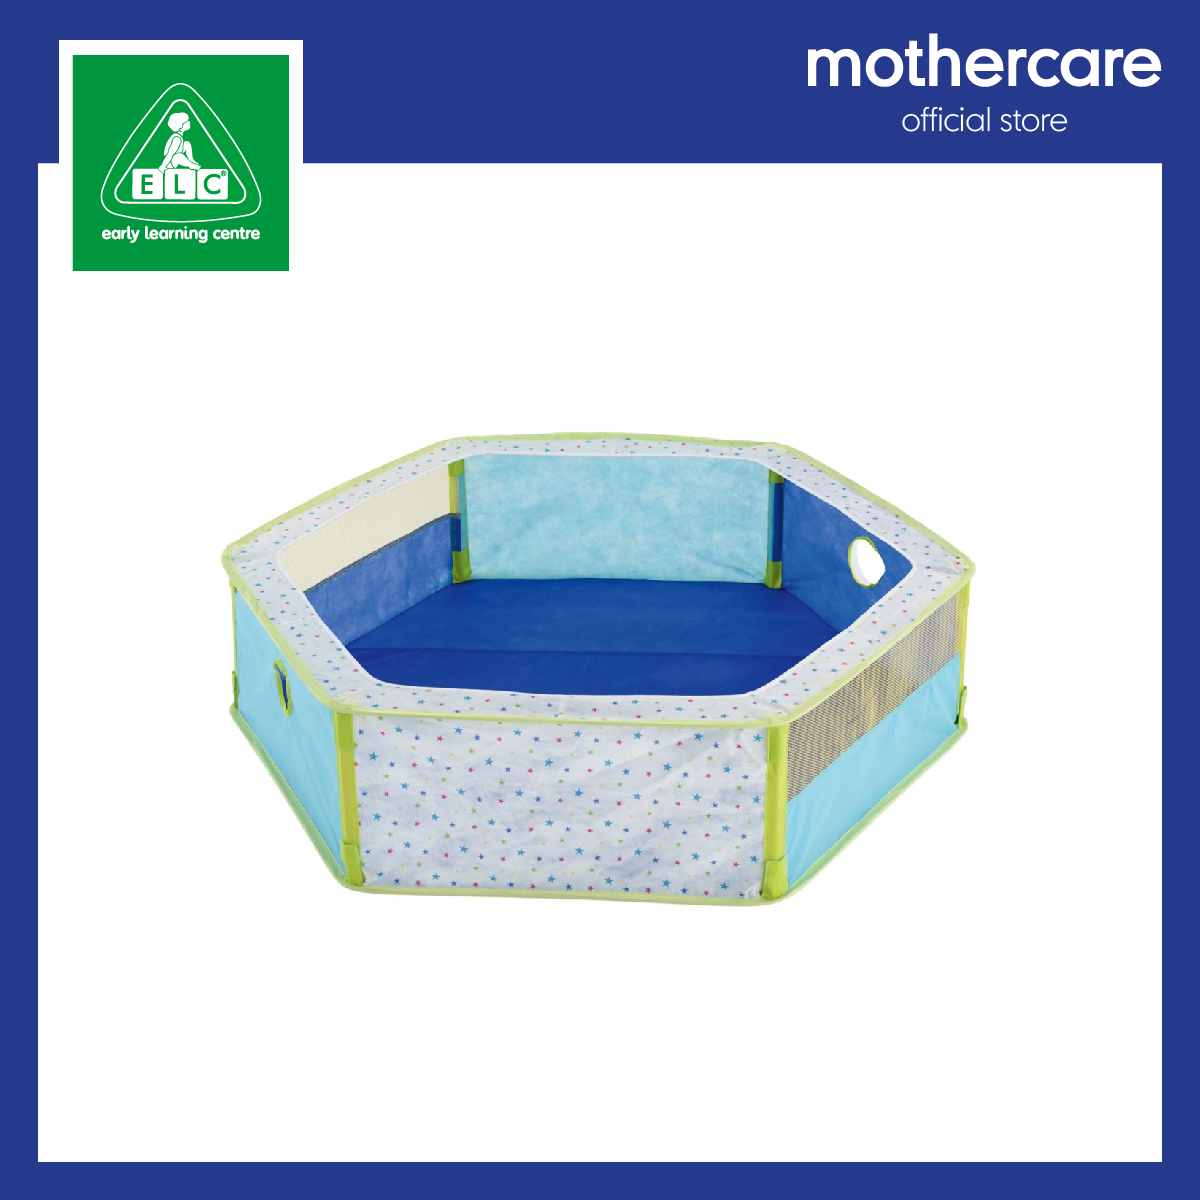 mothercare ball pit